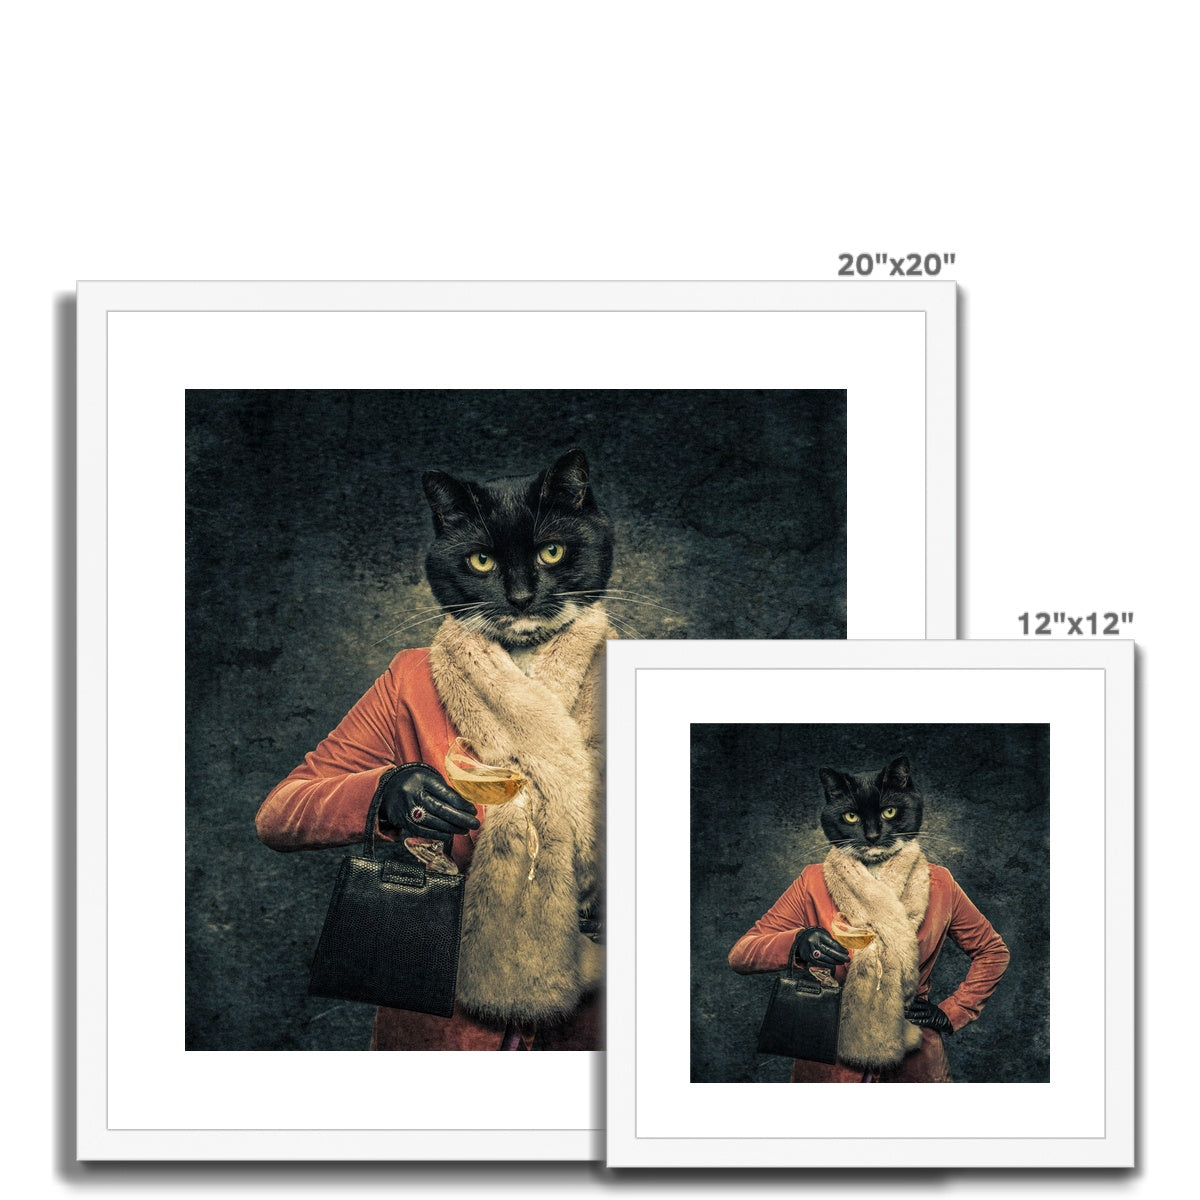 Anthropomorphic cat spilling drink from champagne coupe Framed & Mounted Print